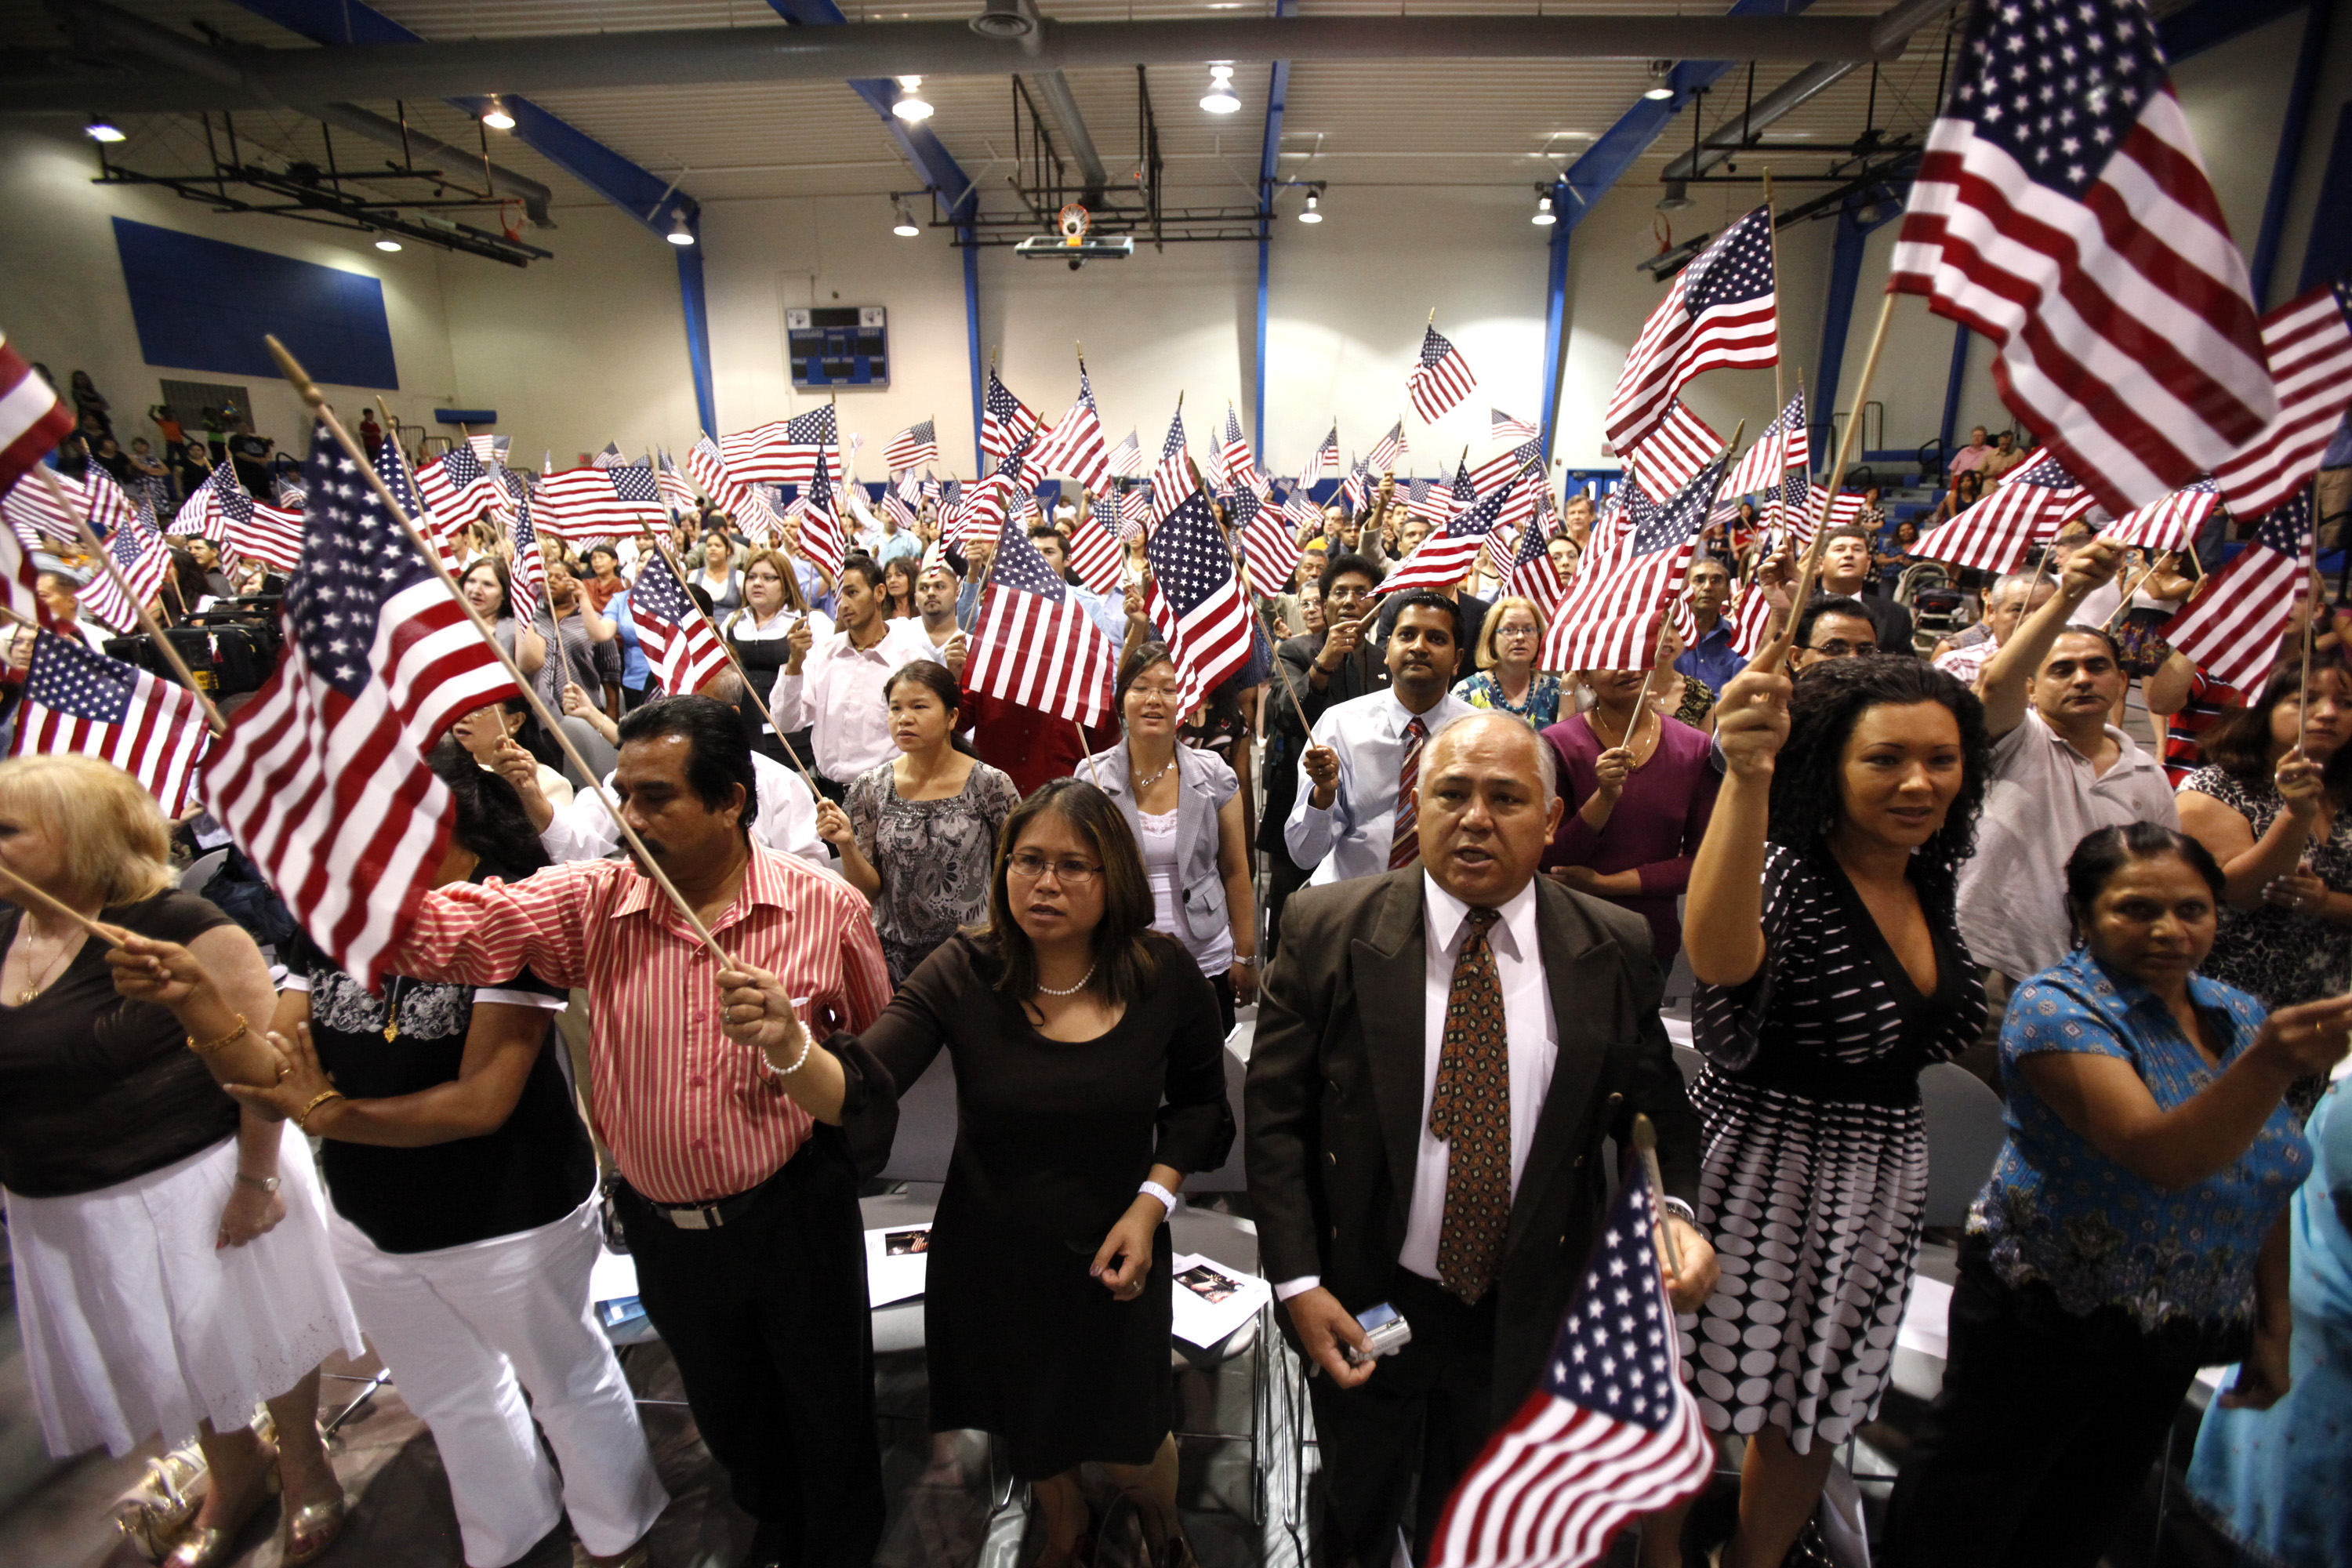 People hold flags as they are sworn in as U.S. citizens during a naturalization ceremony on Tuesday, July 2, 2010 in Phoenix. (AP Photo/Rick Scuteri)